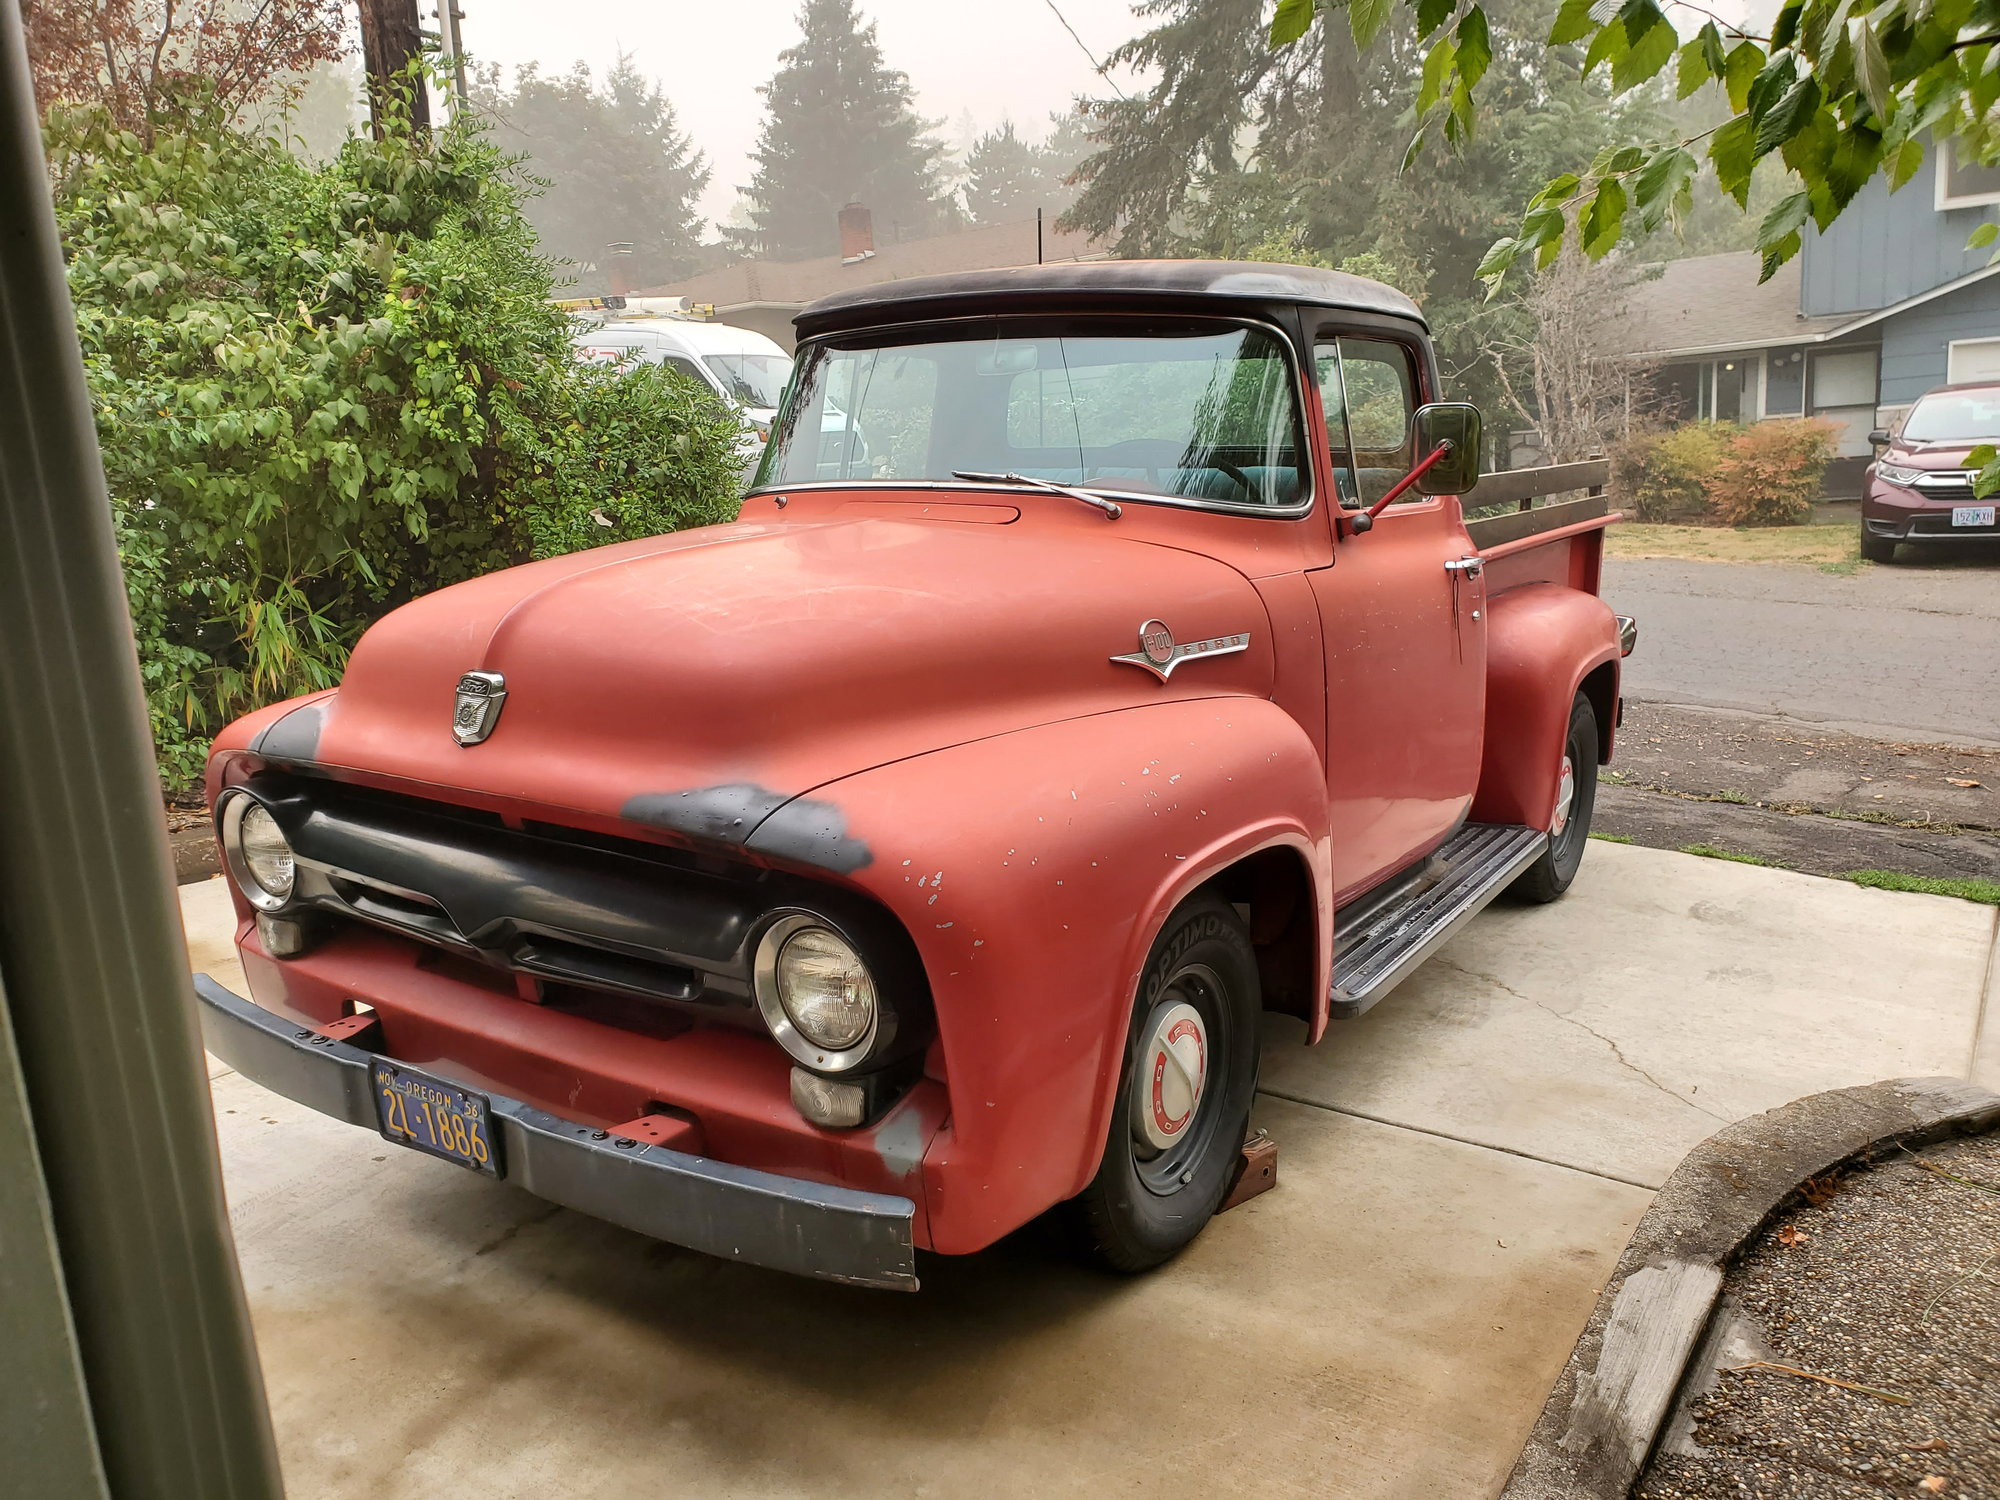 1956 Ford F-100 - 1956 FORD F100 Pickup Truck   Mostly Stock, 302 V8 from a Torino  C4 Automatic, Dana 60 - Used - VIN F10D6R-15488 - 8 cyl - 2WD - Automatic - Truck - Red - Eugene, OR 97405, United States